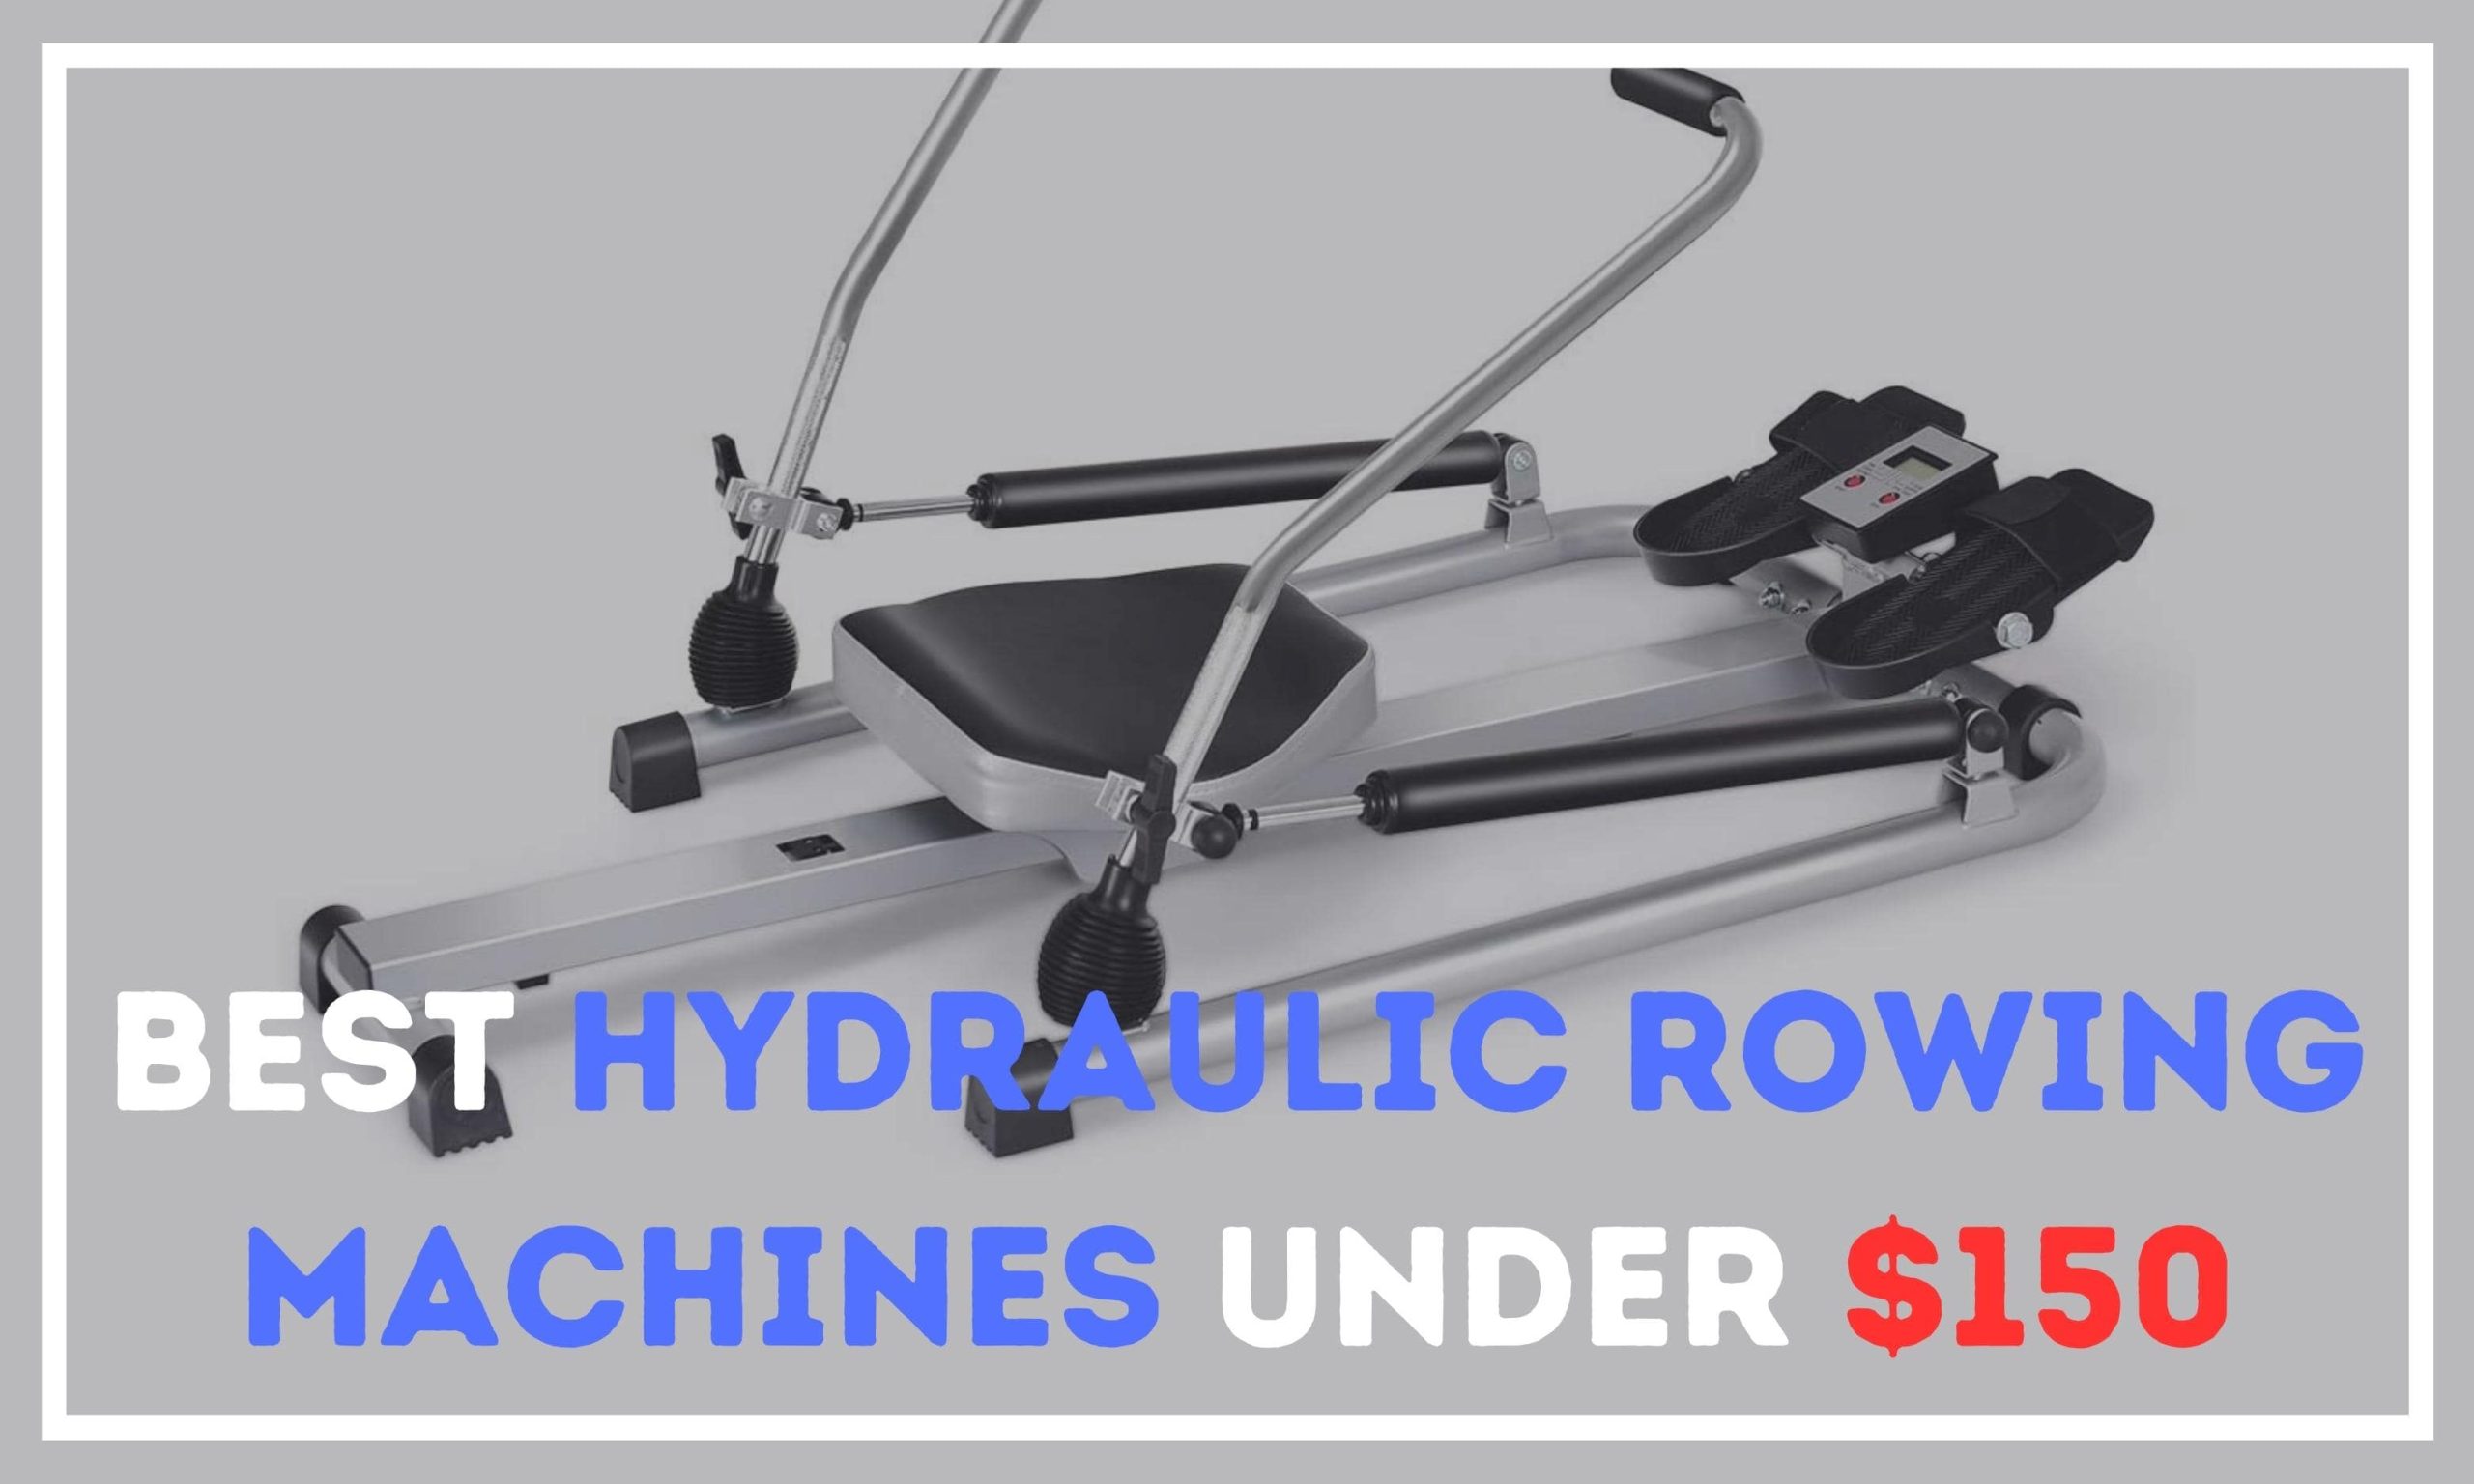 Best Hydraulic Rowing Machines Under $150 for Your Fitness Routine